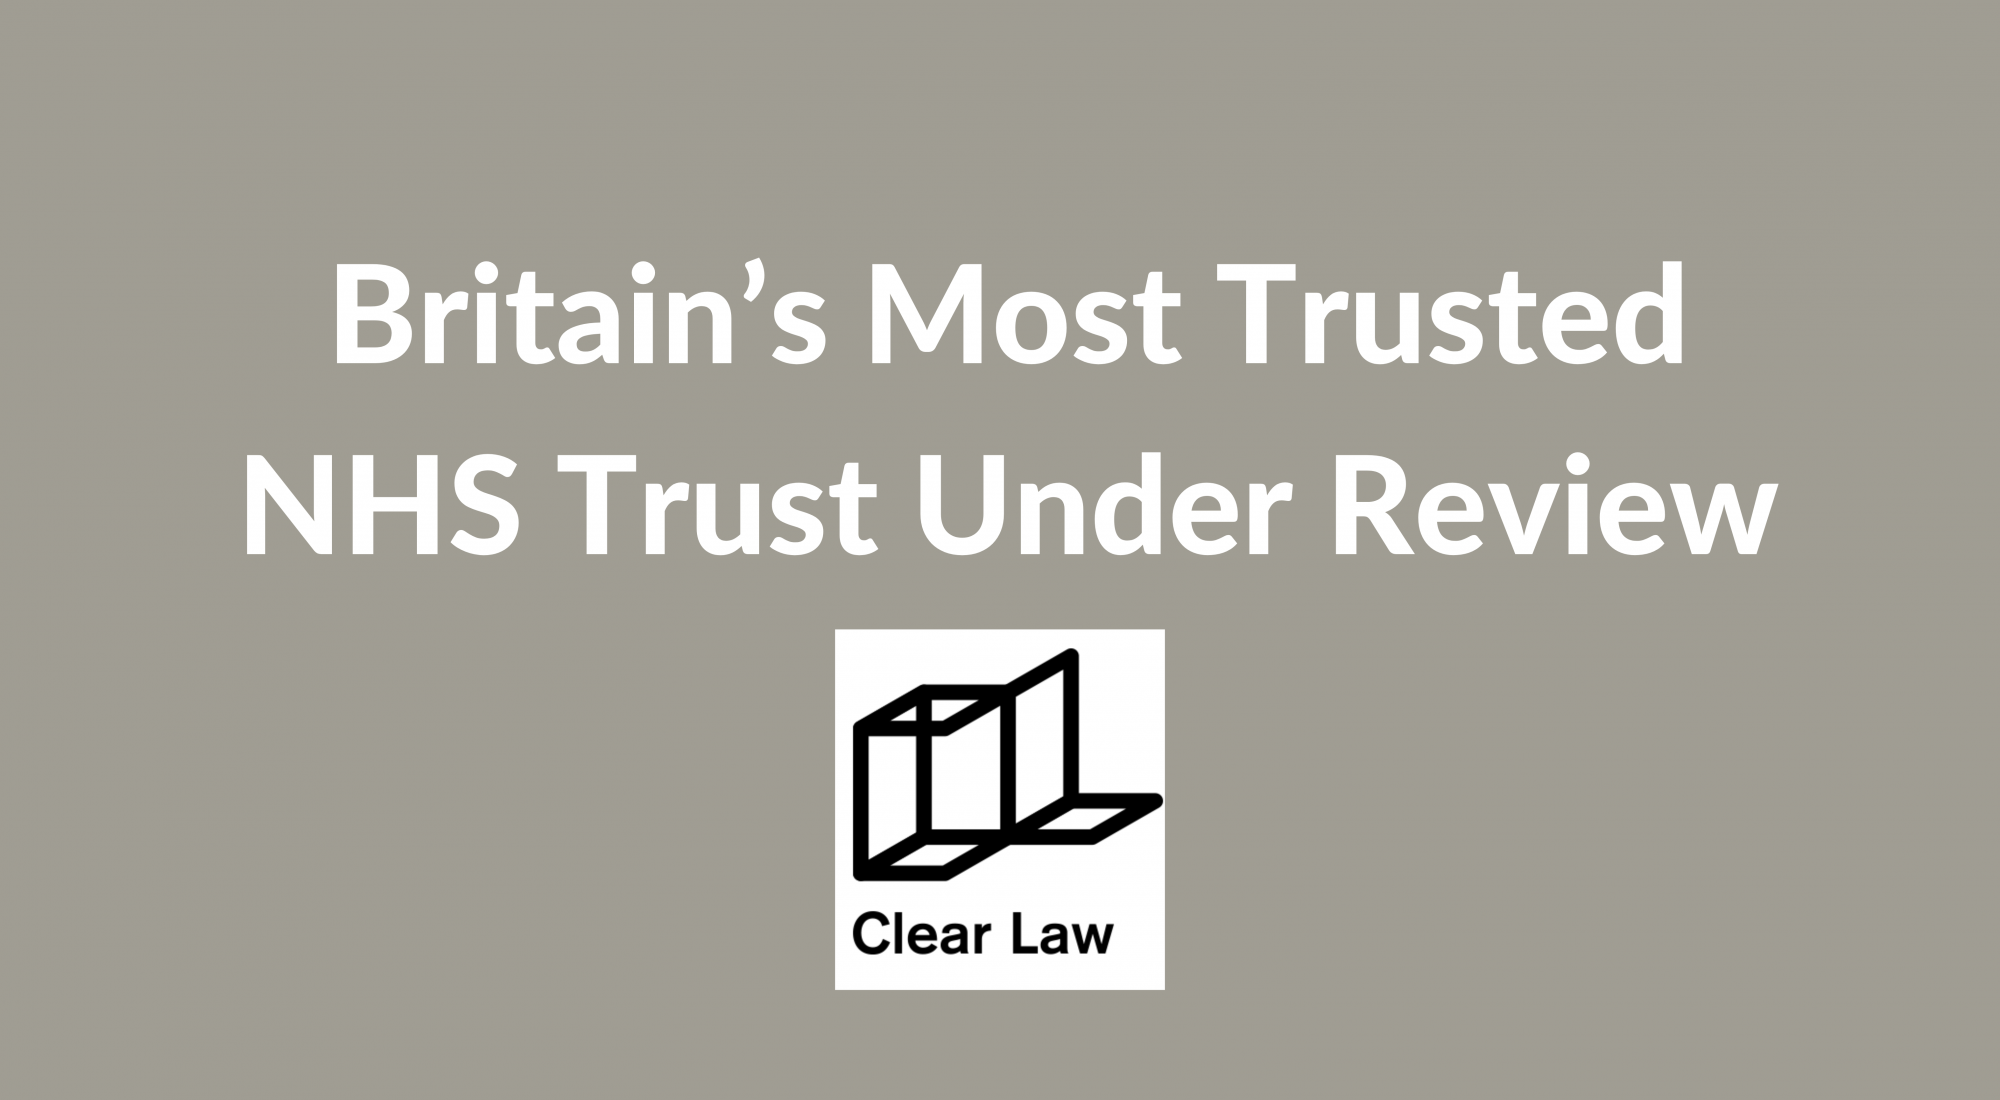 Britain’s Most Trusted NHS Trust Under Review - written by Matthew Waterfield, Clinical Negligence Fee Earner